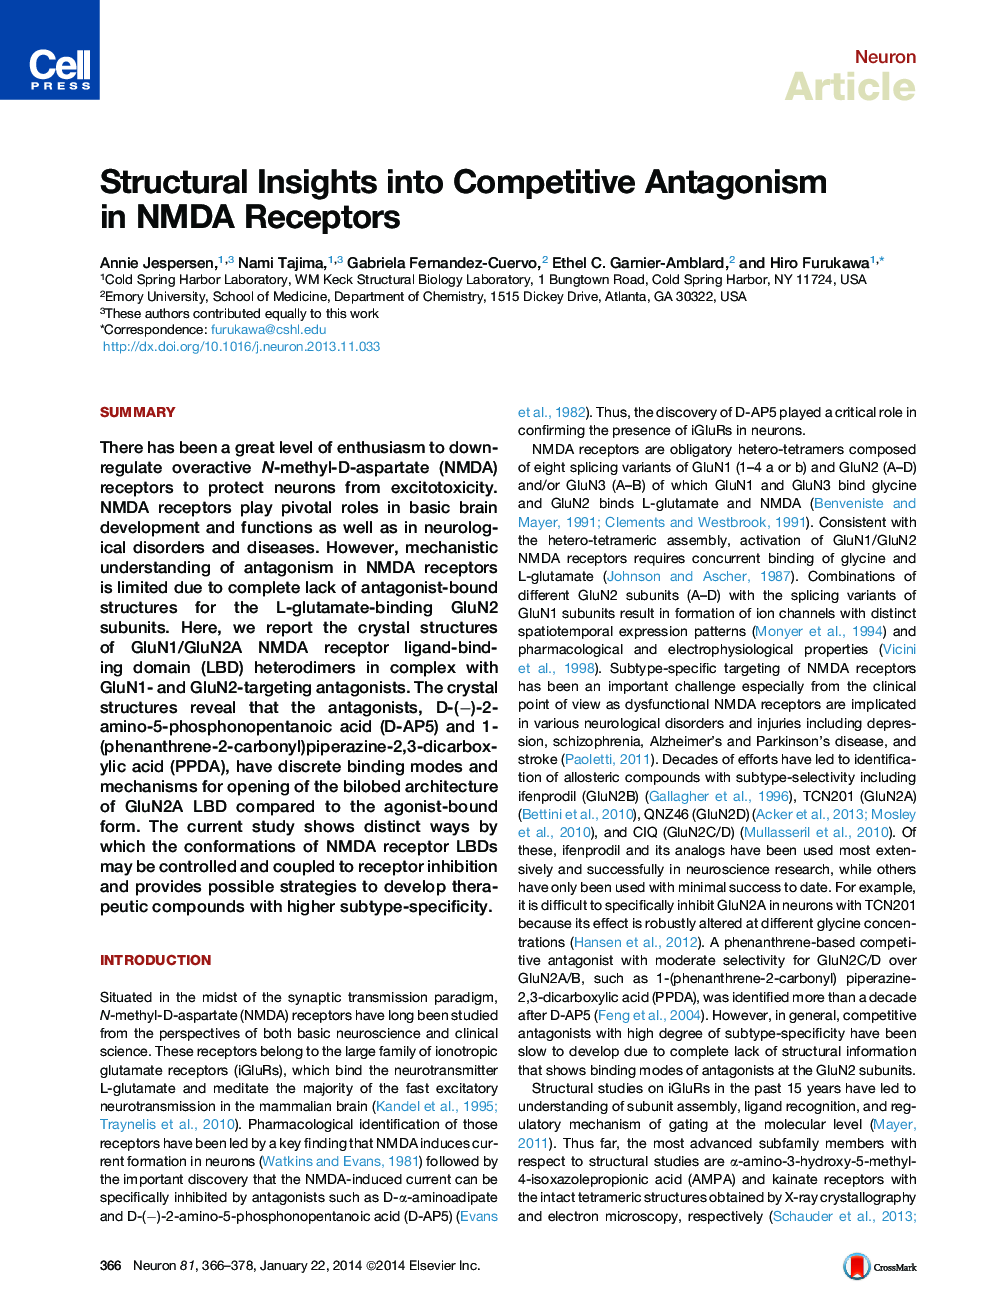 Structural Insights into Competitive Antagonism in NMDA Receptors